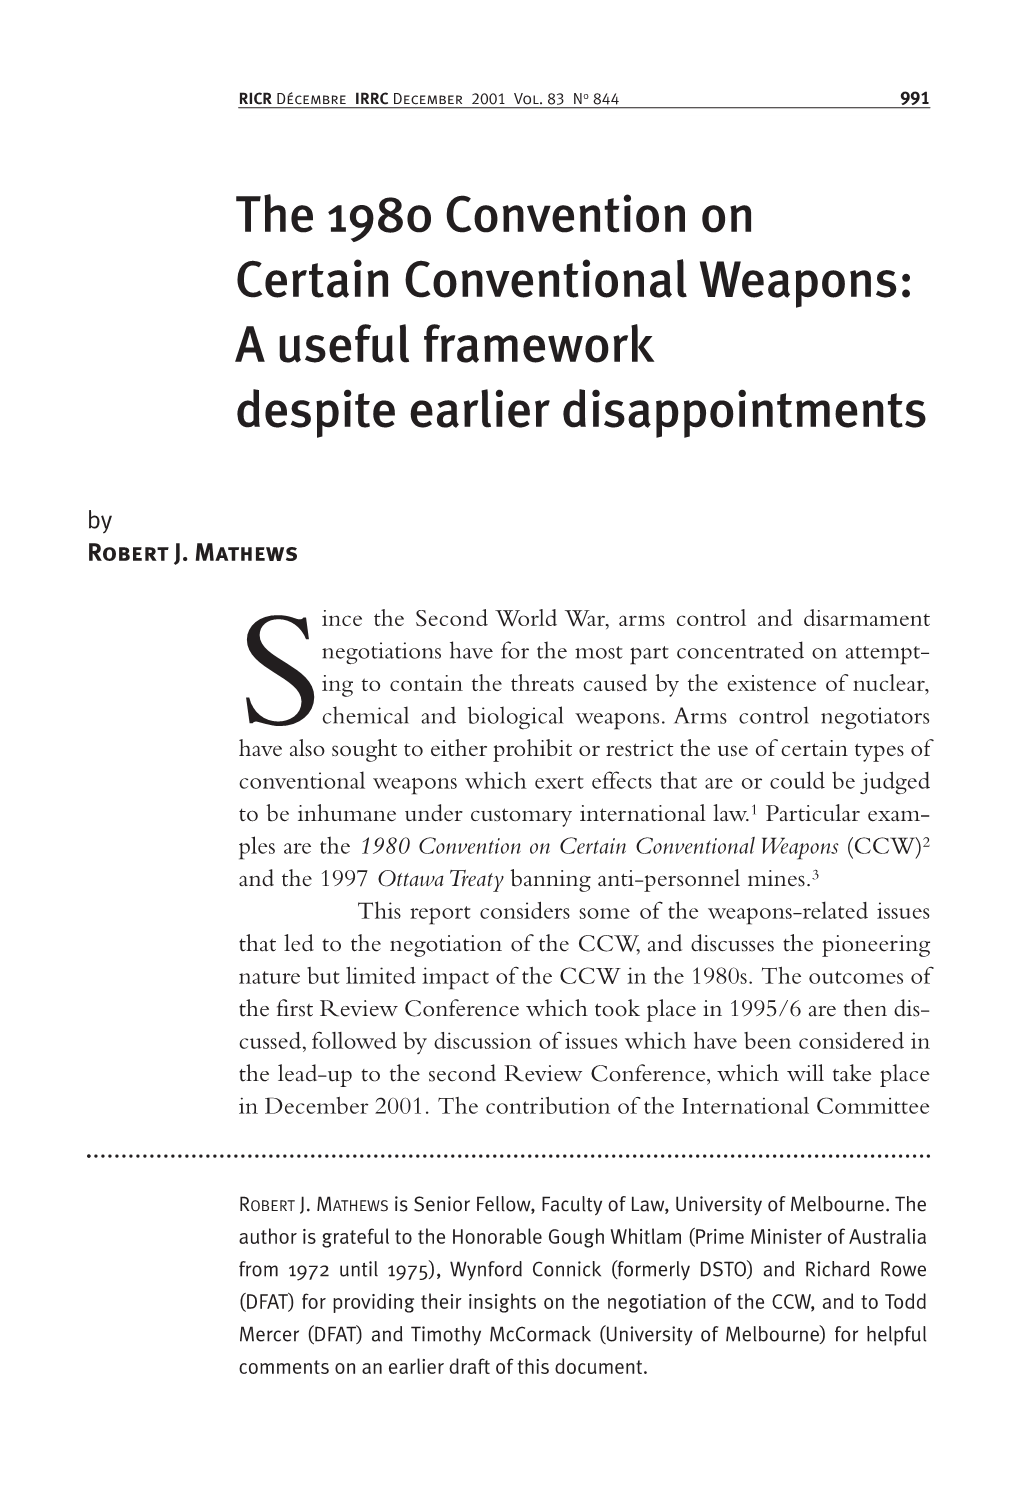 The 1980 Convention on Certain Conventional Weapons: a Useful Framework Despite Earlier Disappointments by Robert J